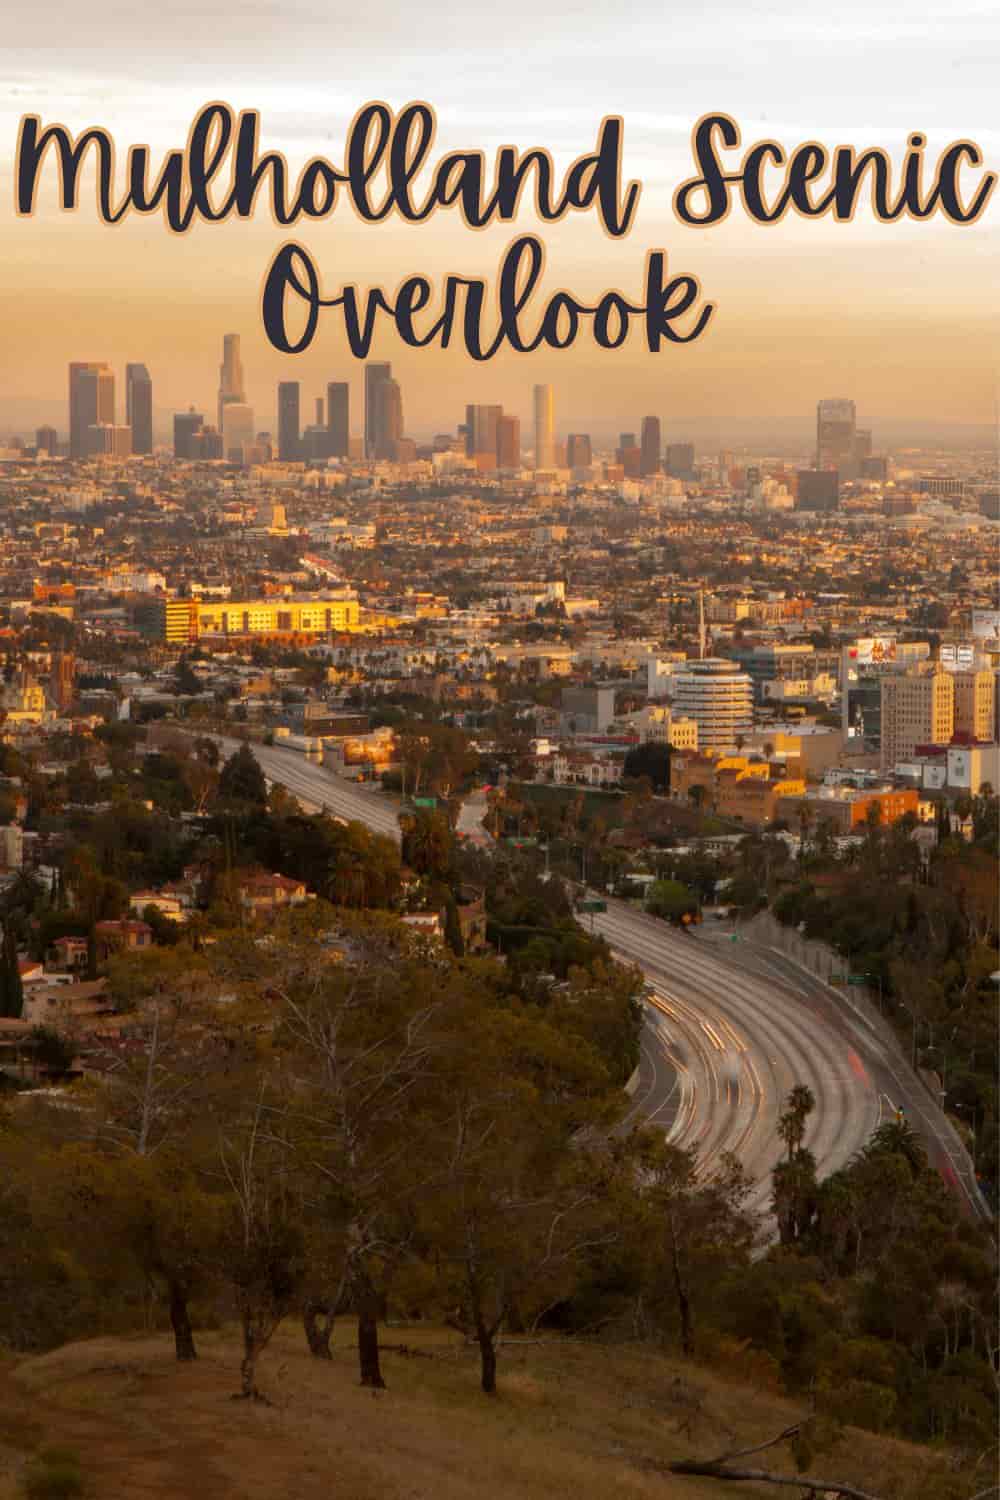 Mulholland Scenic Overlook of Los Angeles